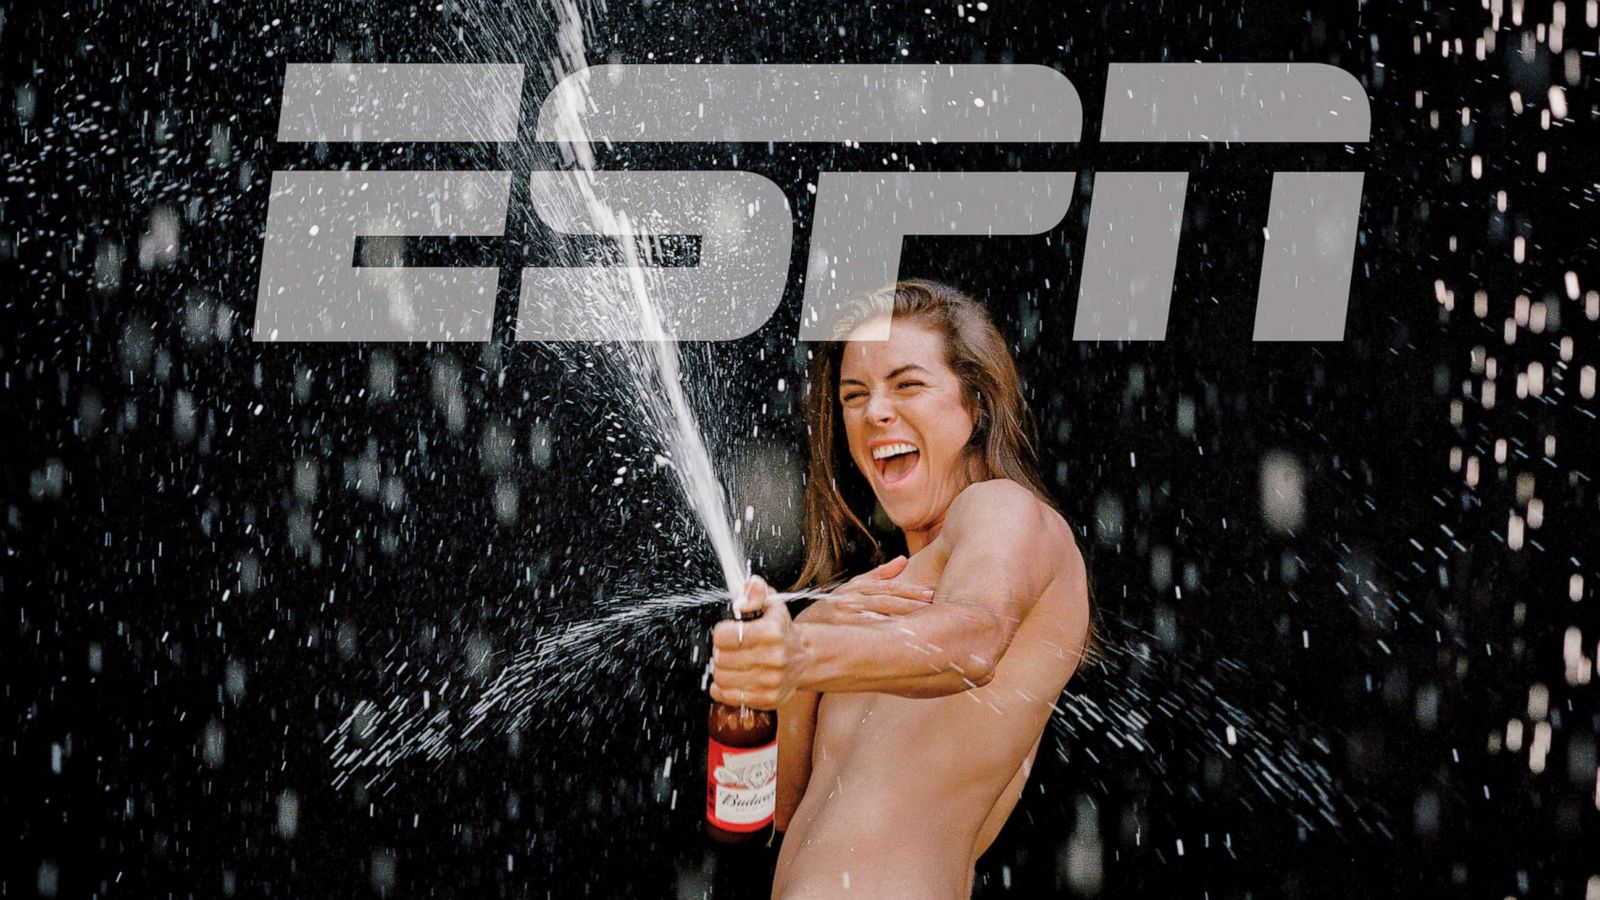 ESPN Body Issue 2019: Official Photos Revealed for Featured